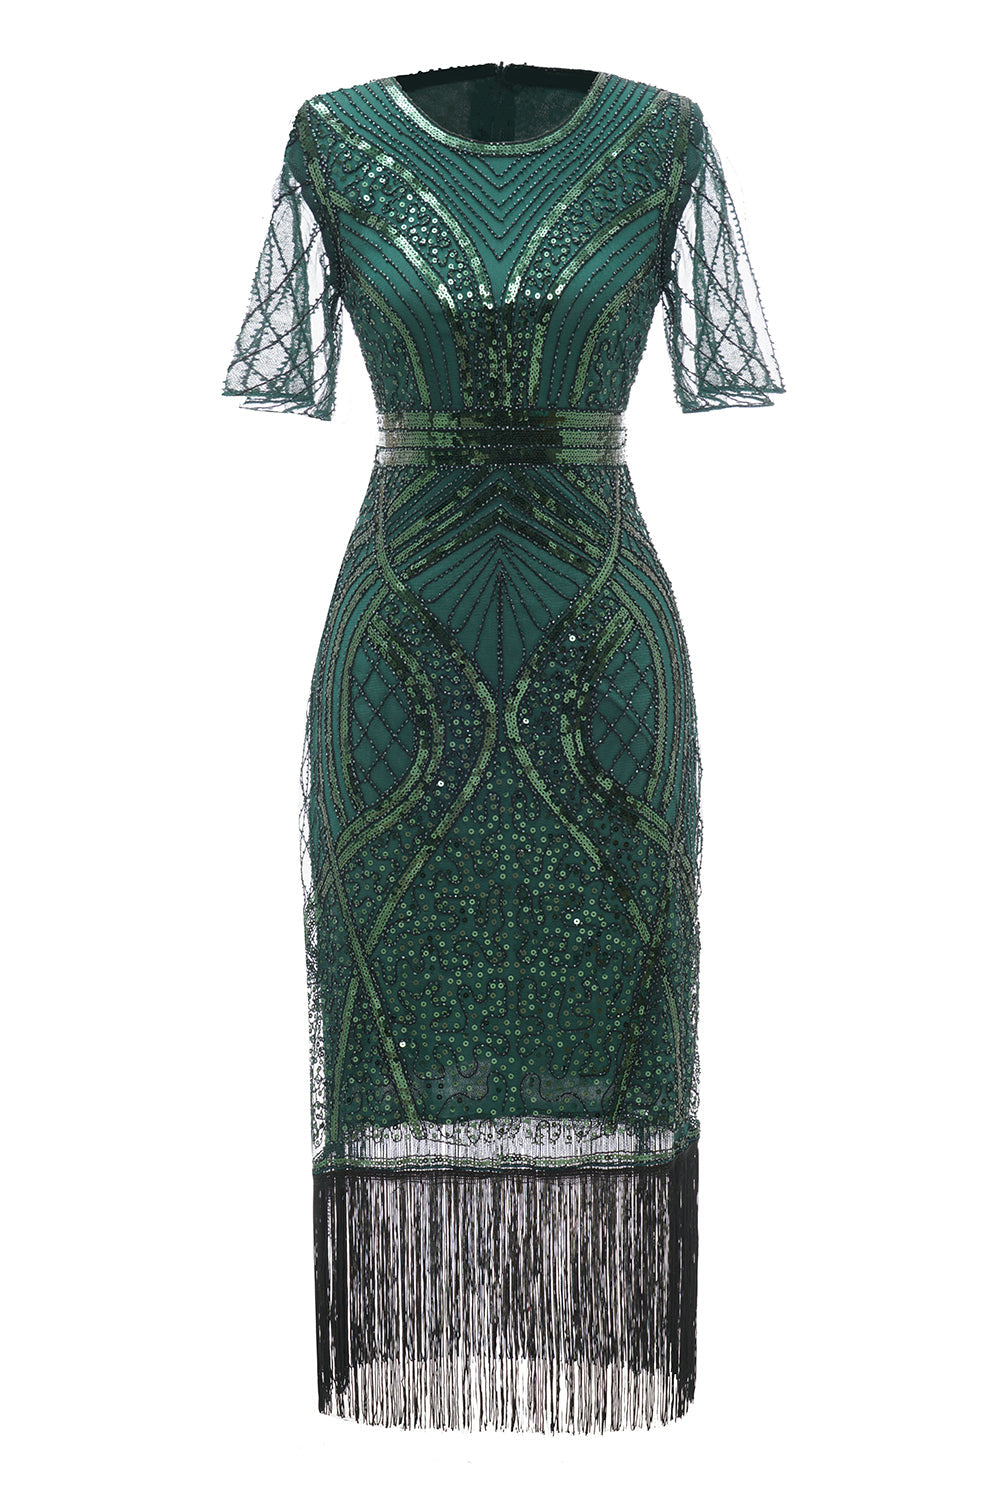 Dark Green Short Sleeves 1920s Dress With Fringes